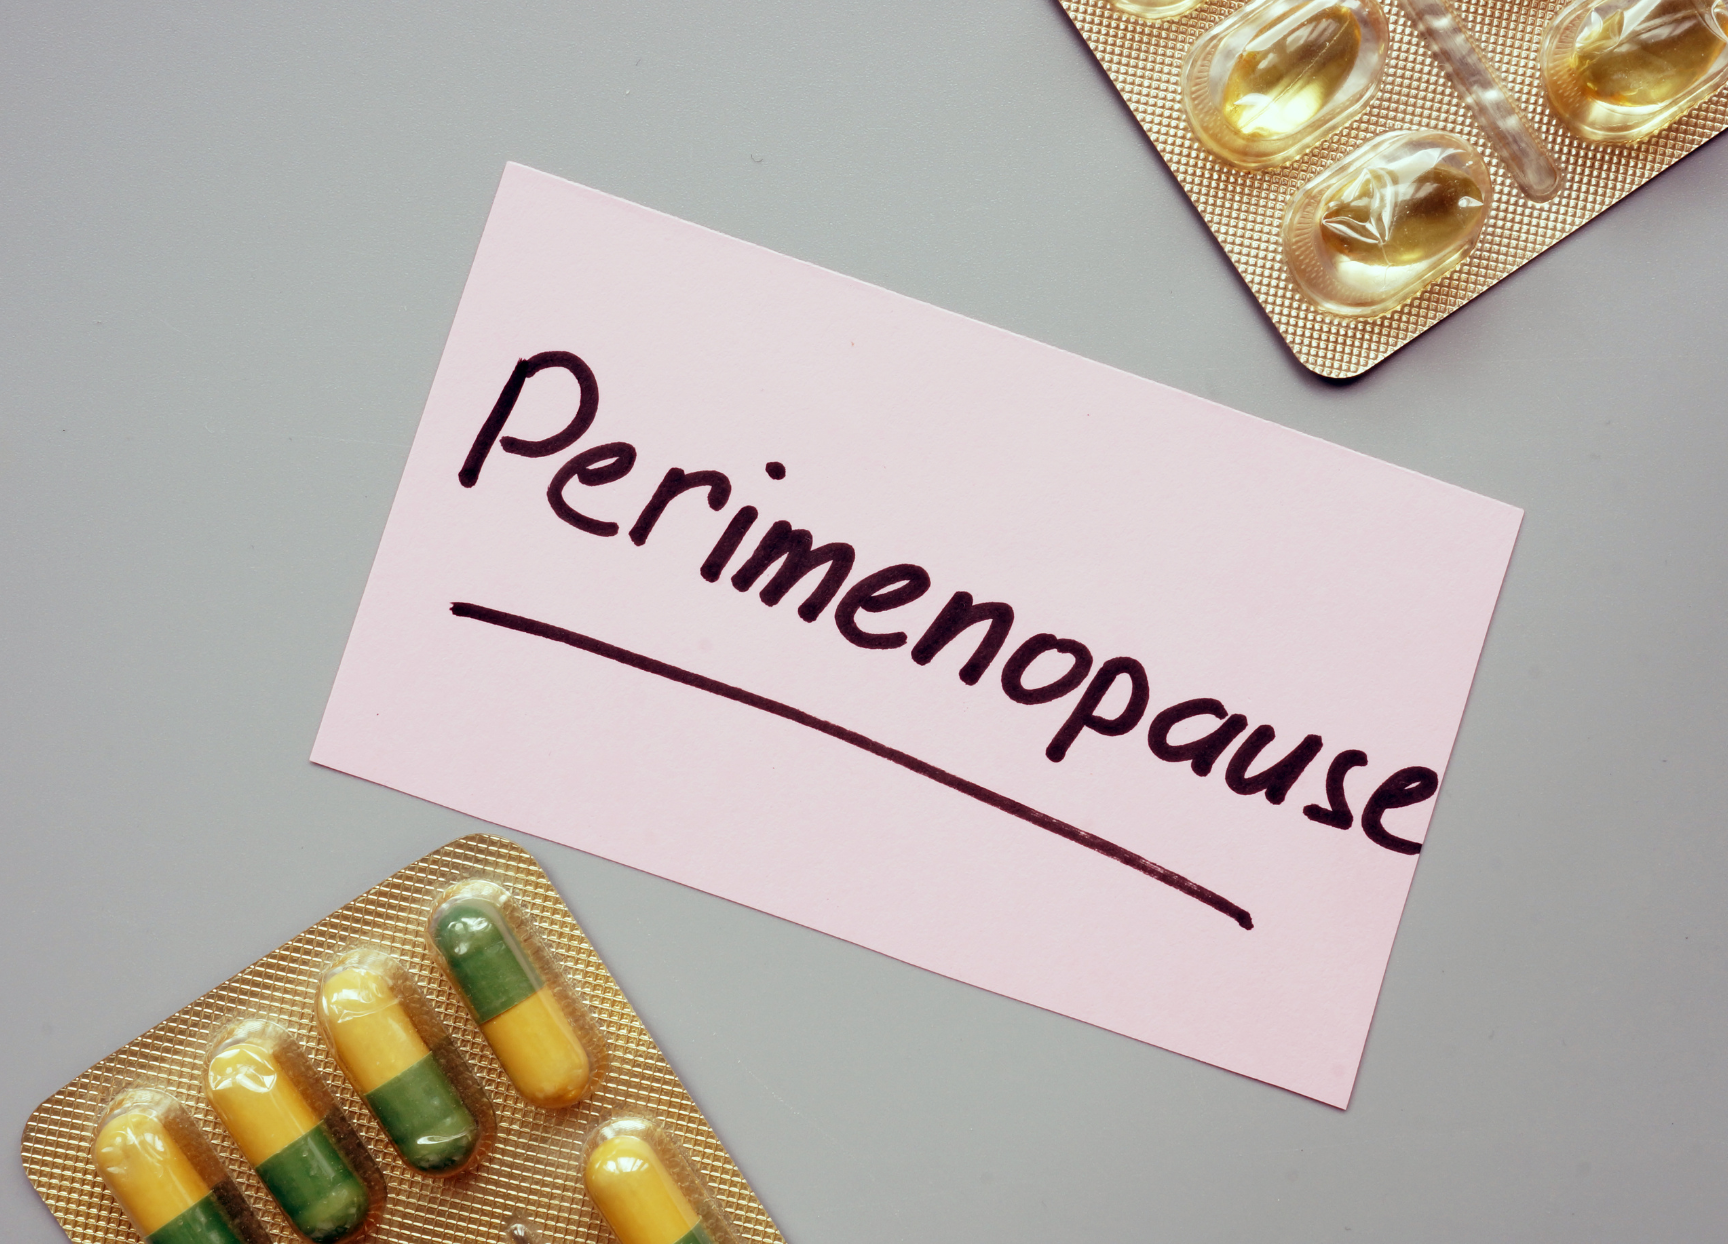 What Exactly Is Perimenopause & What Are The Symptoms?